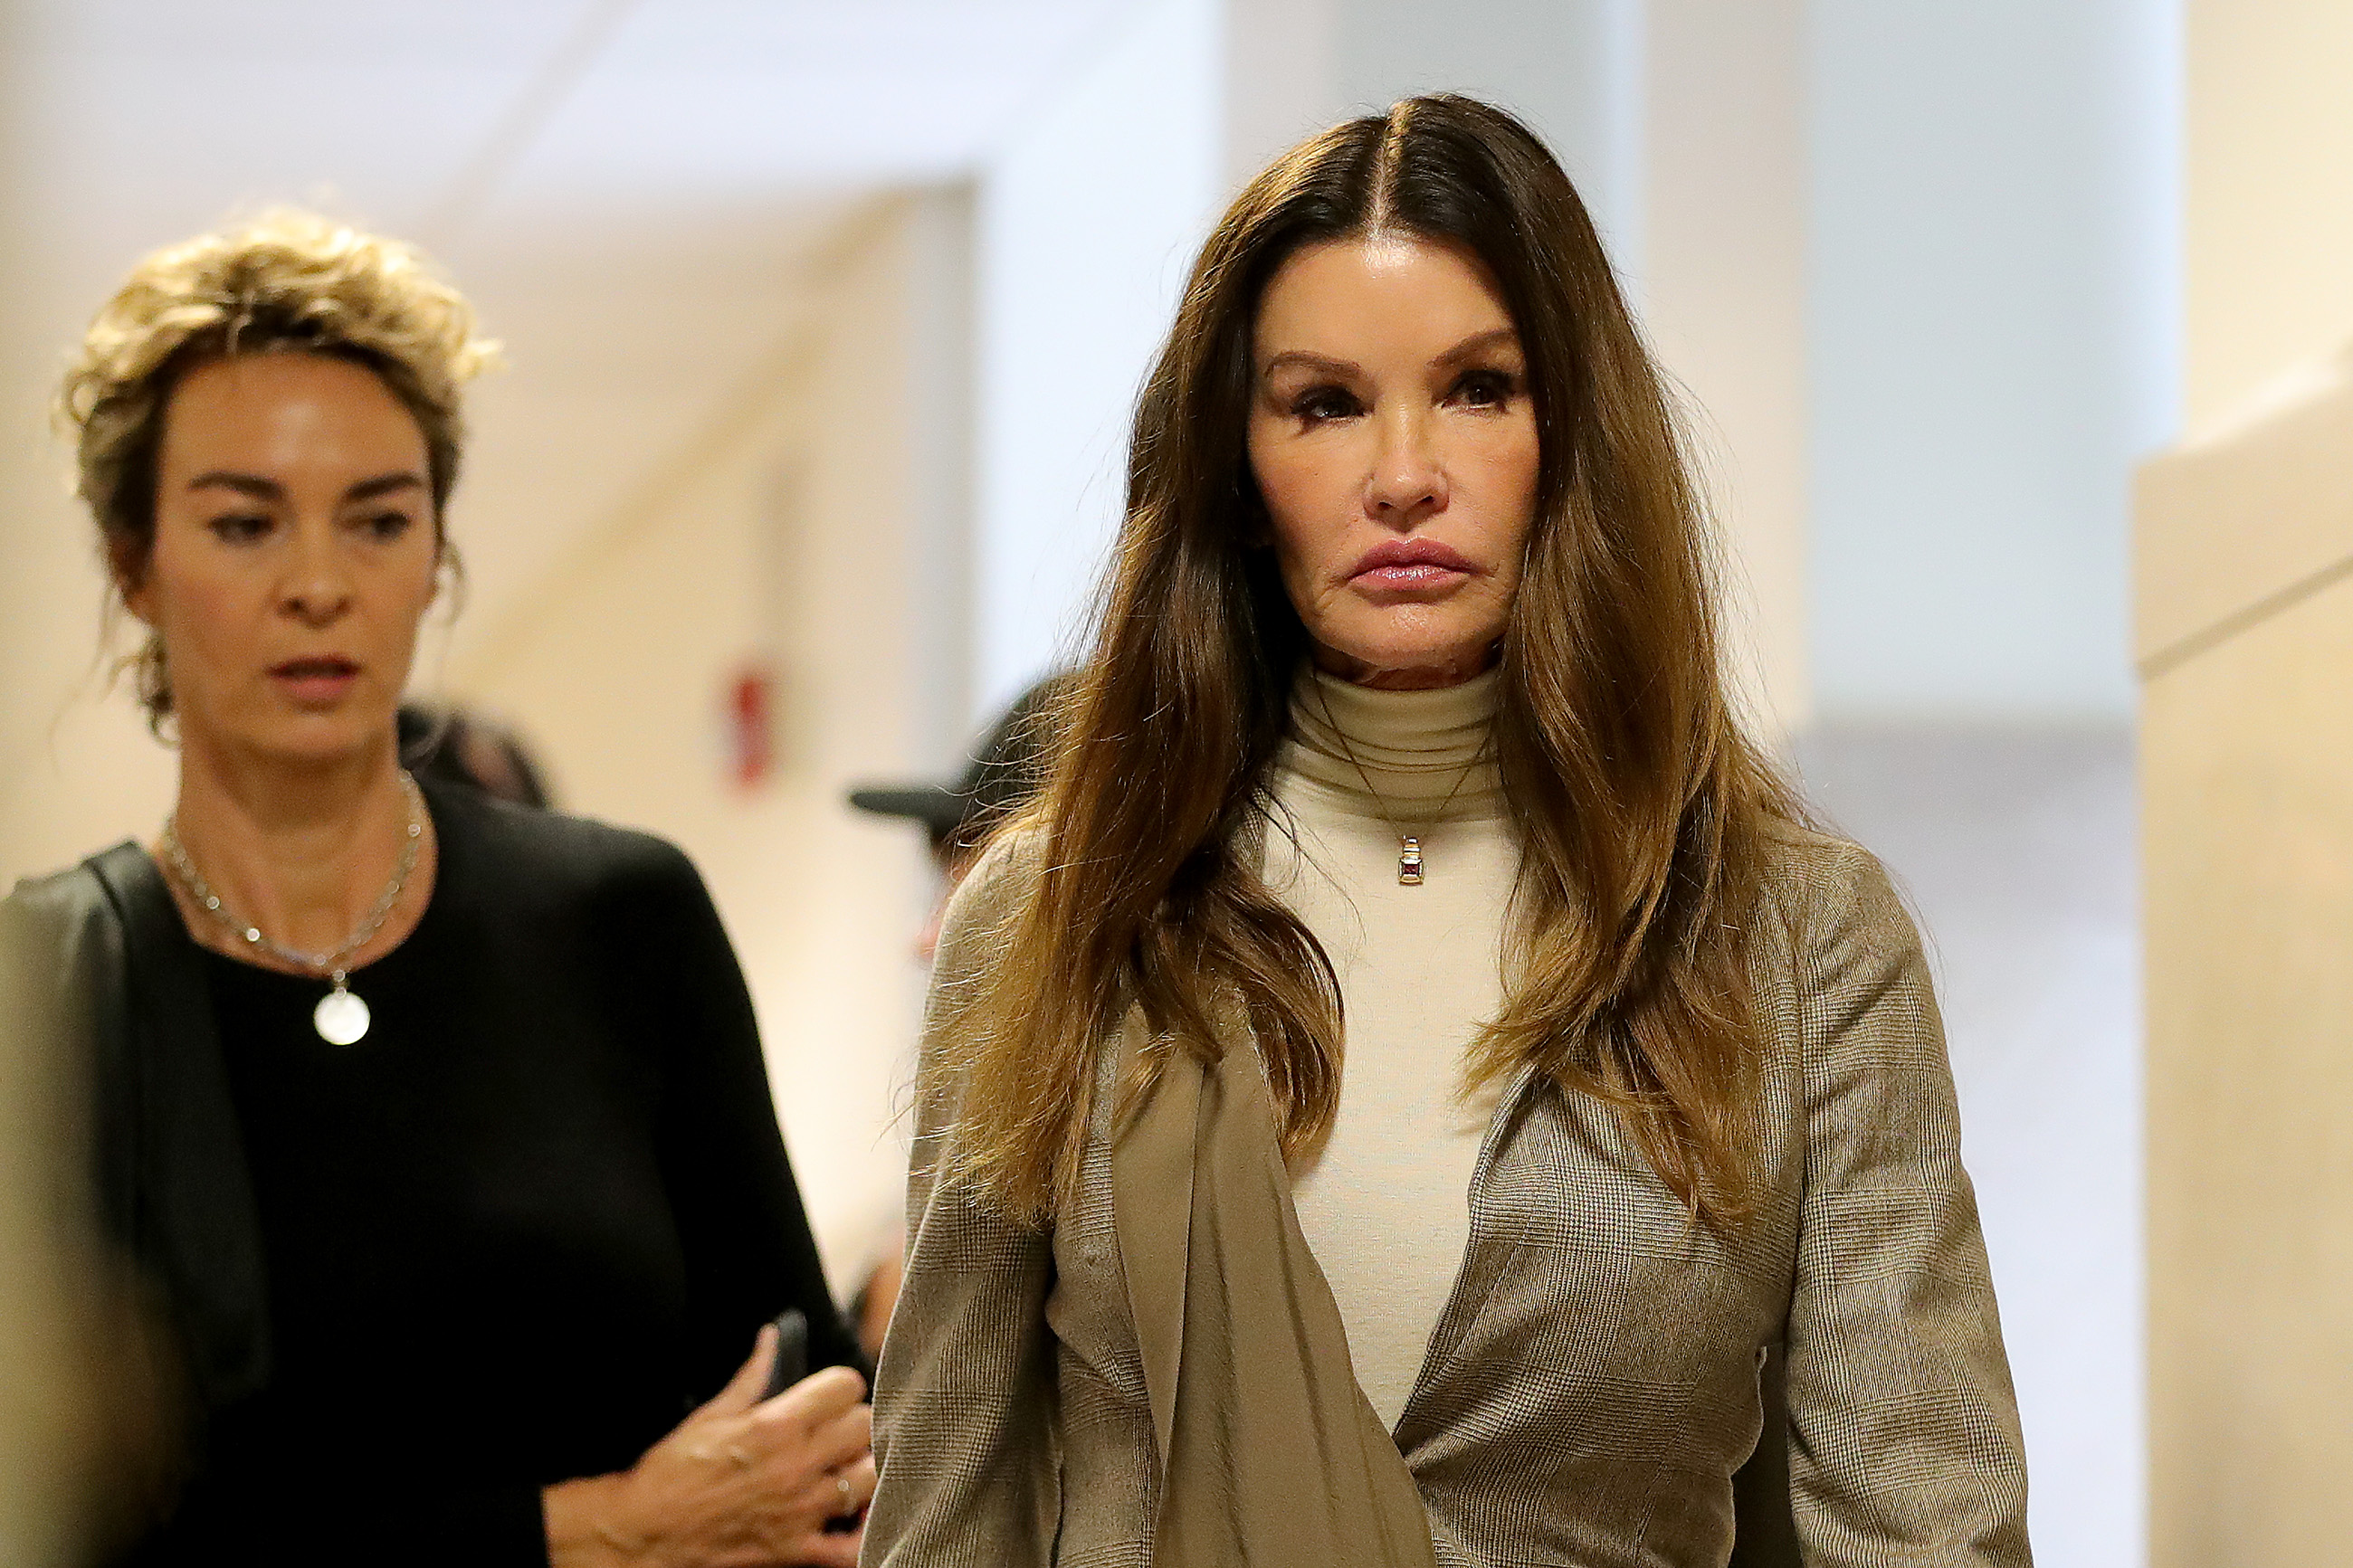 Former model Janice Dickinson arrives at the sentencing hearing for the sexual assault trial of entertainer Bill Cosby at the Montgomery County Courthouse in Norristown, Pennsylvania on September 24, 2018. (Photo by David MAIALETTI / POOL / AFP) (DAVID MAIALETTI&mdash;AFP/Getty Images)